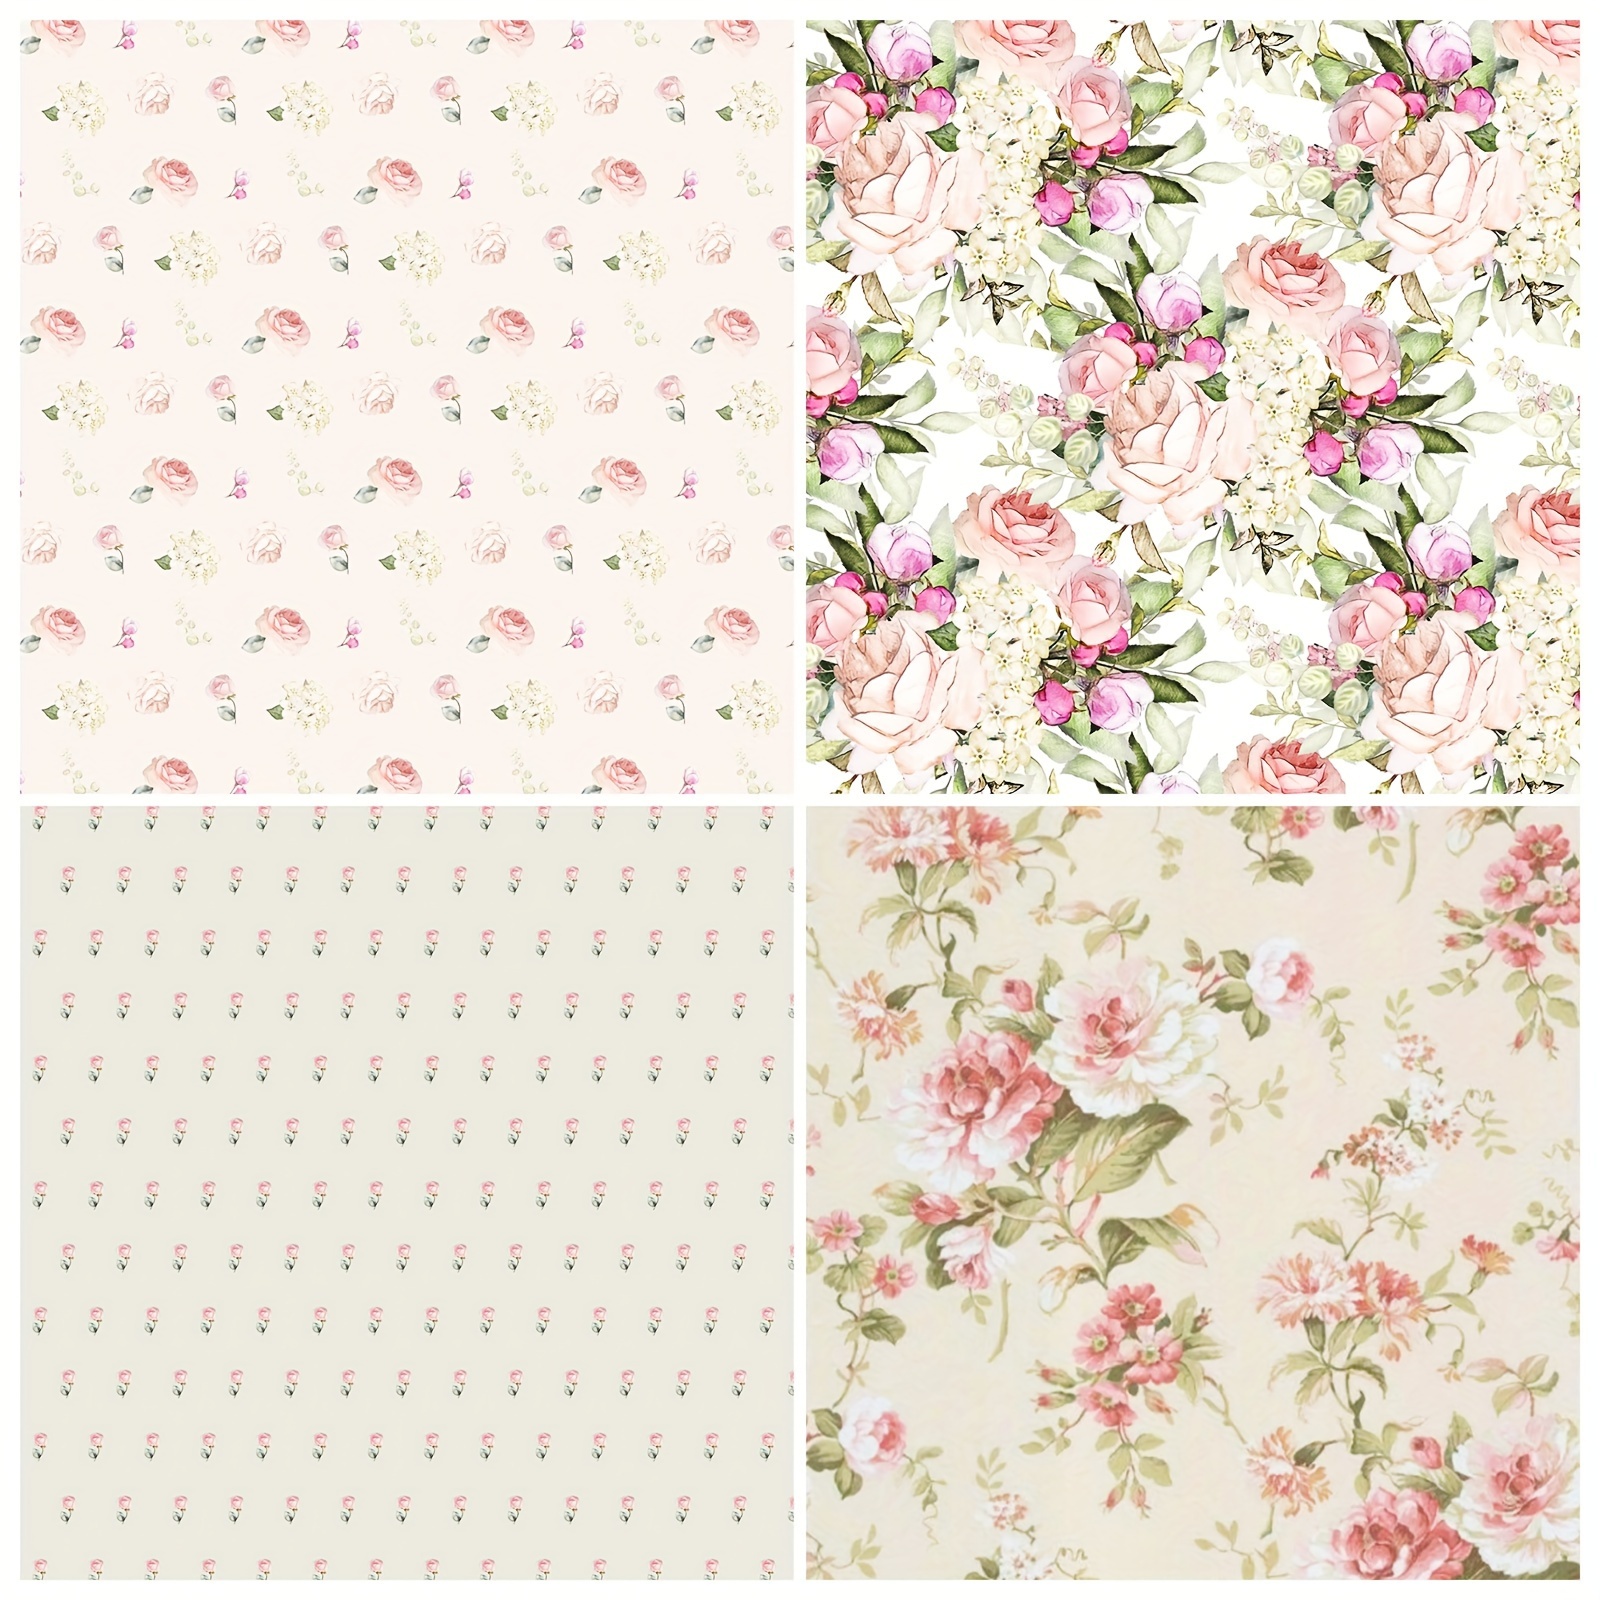 Material Paper - Fresh Spring Blossom Journaling Paper